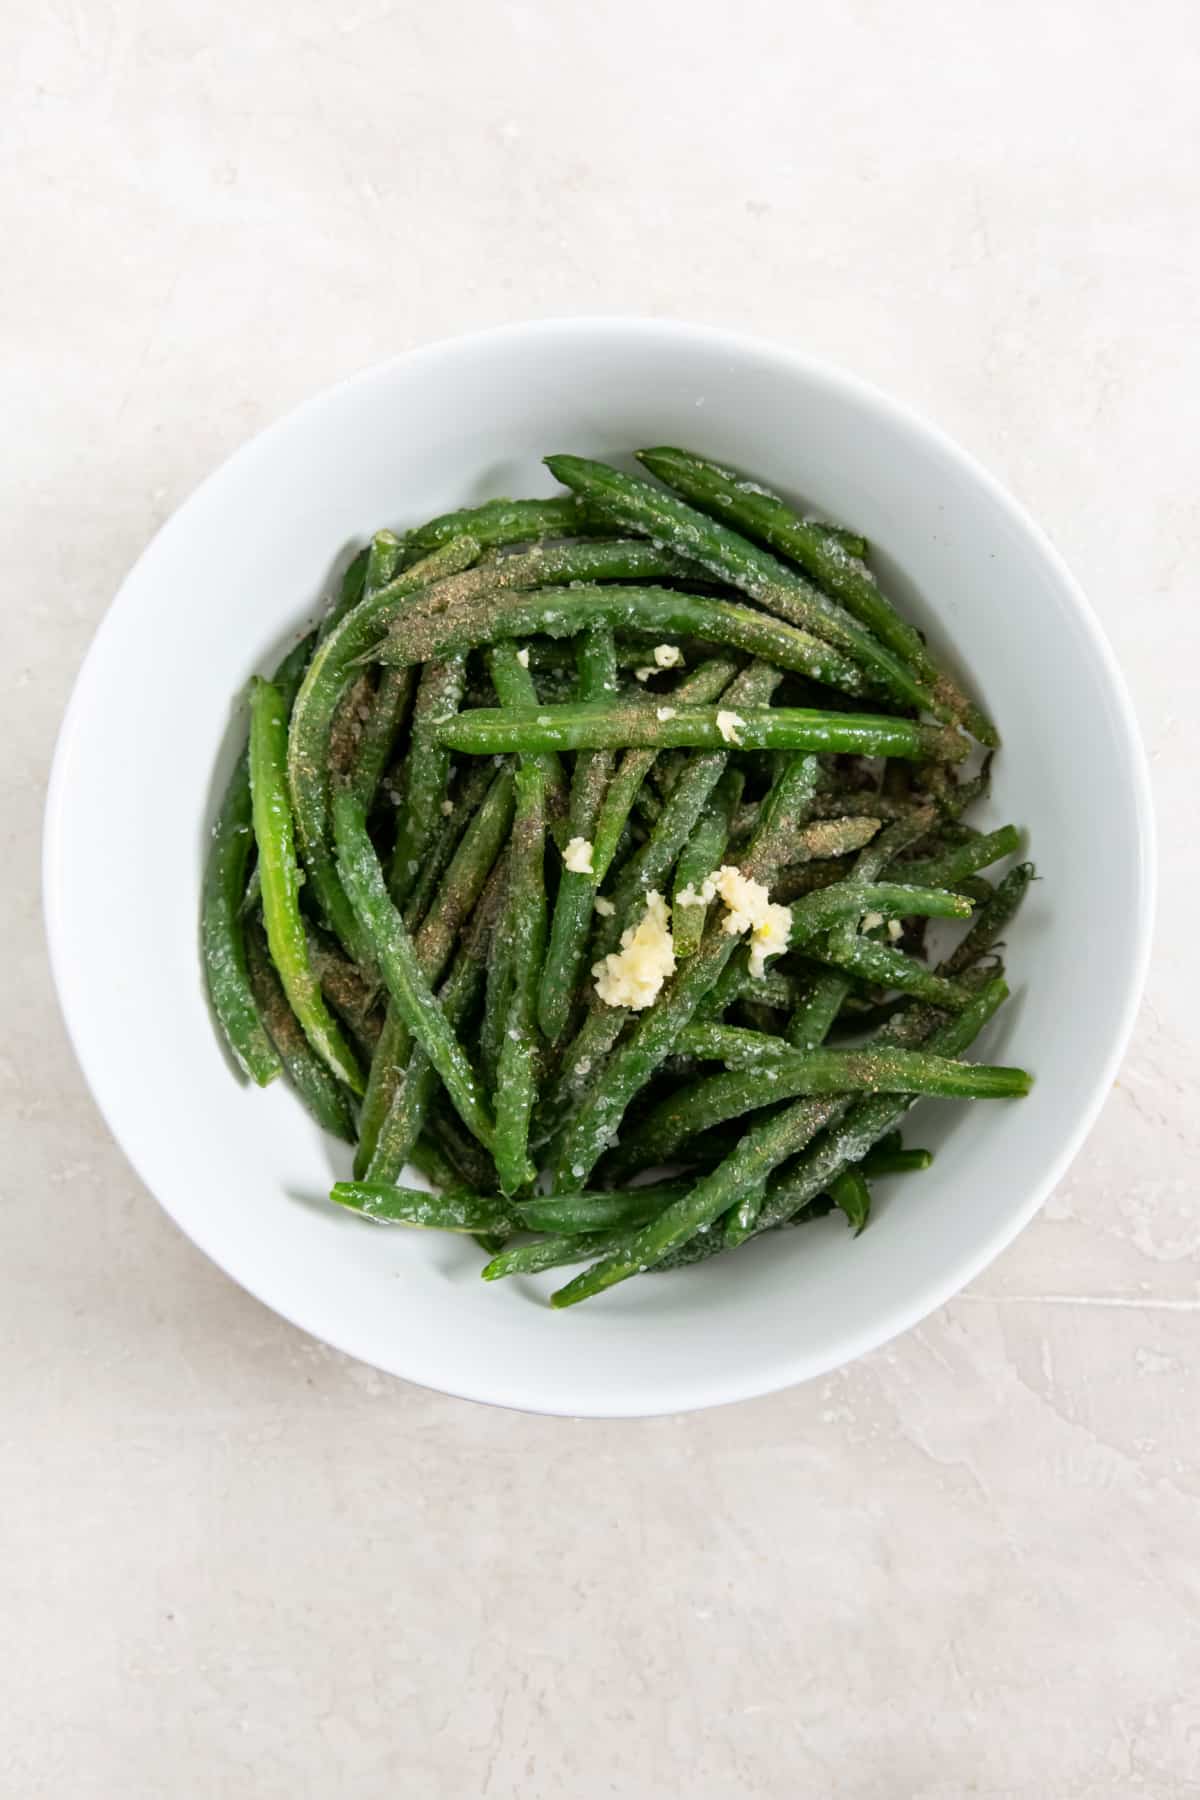 Green beans, garlic, olive oil, salt and pepper in a white bowl before mixing to combine.